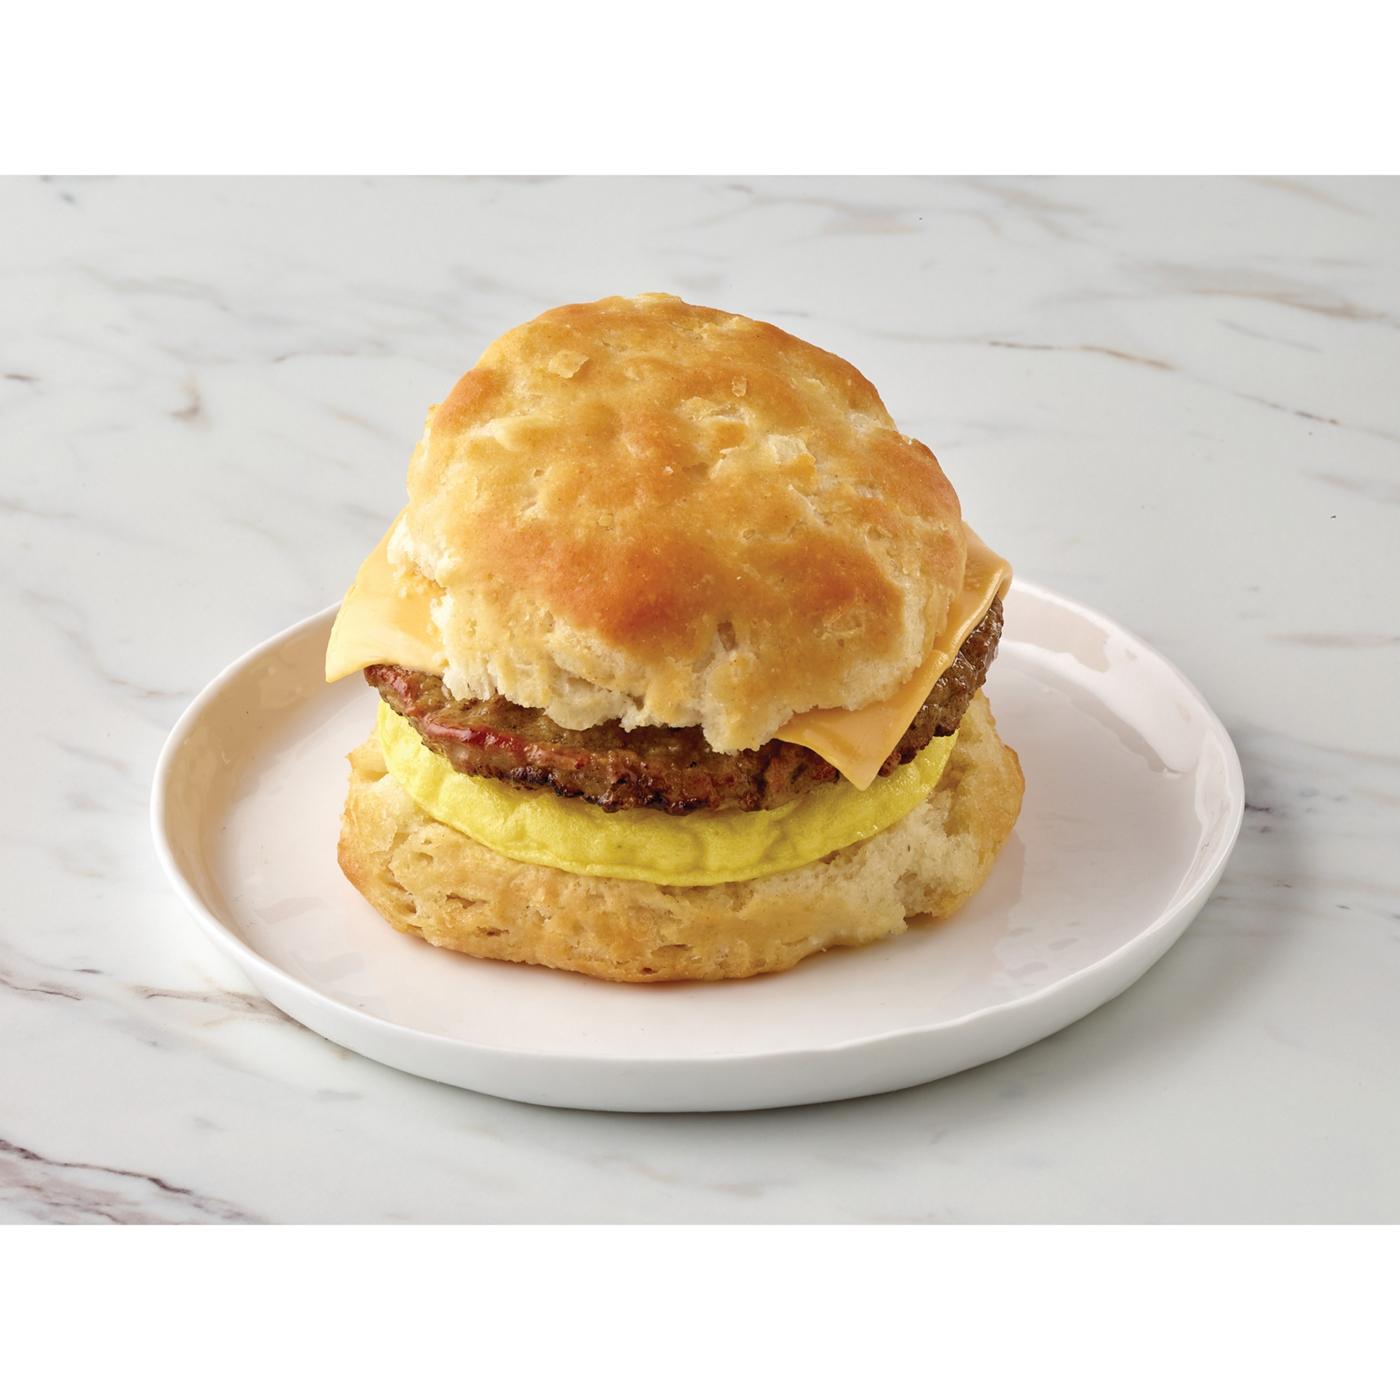 H-E-B Bakery Breakfast Biscuit Sandwich - Sausage, Egg & Cheese; image 4 of 4